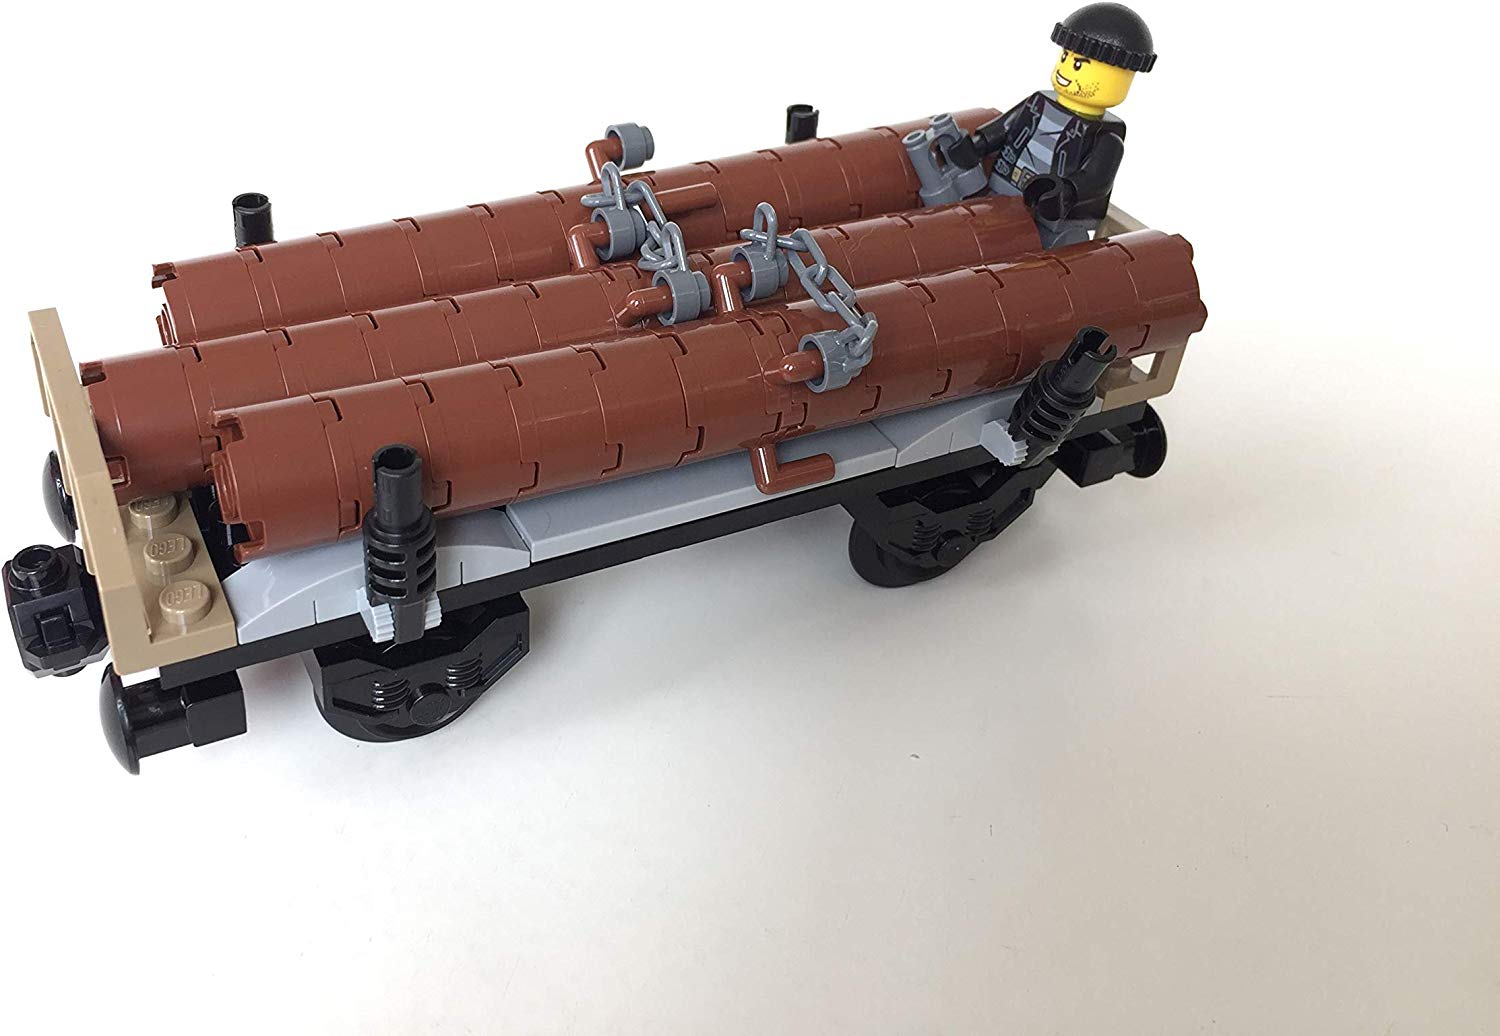 Genuine Lego City Train Carriage With Logs – 60198